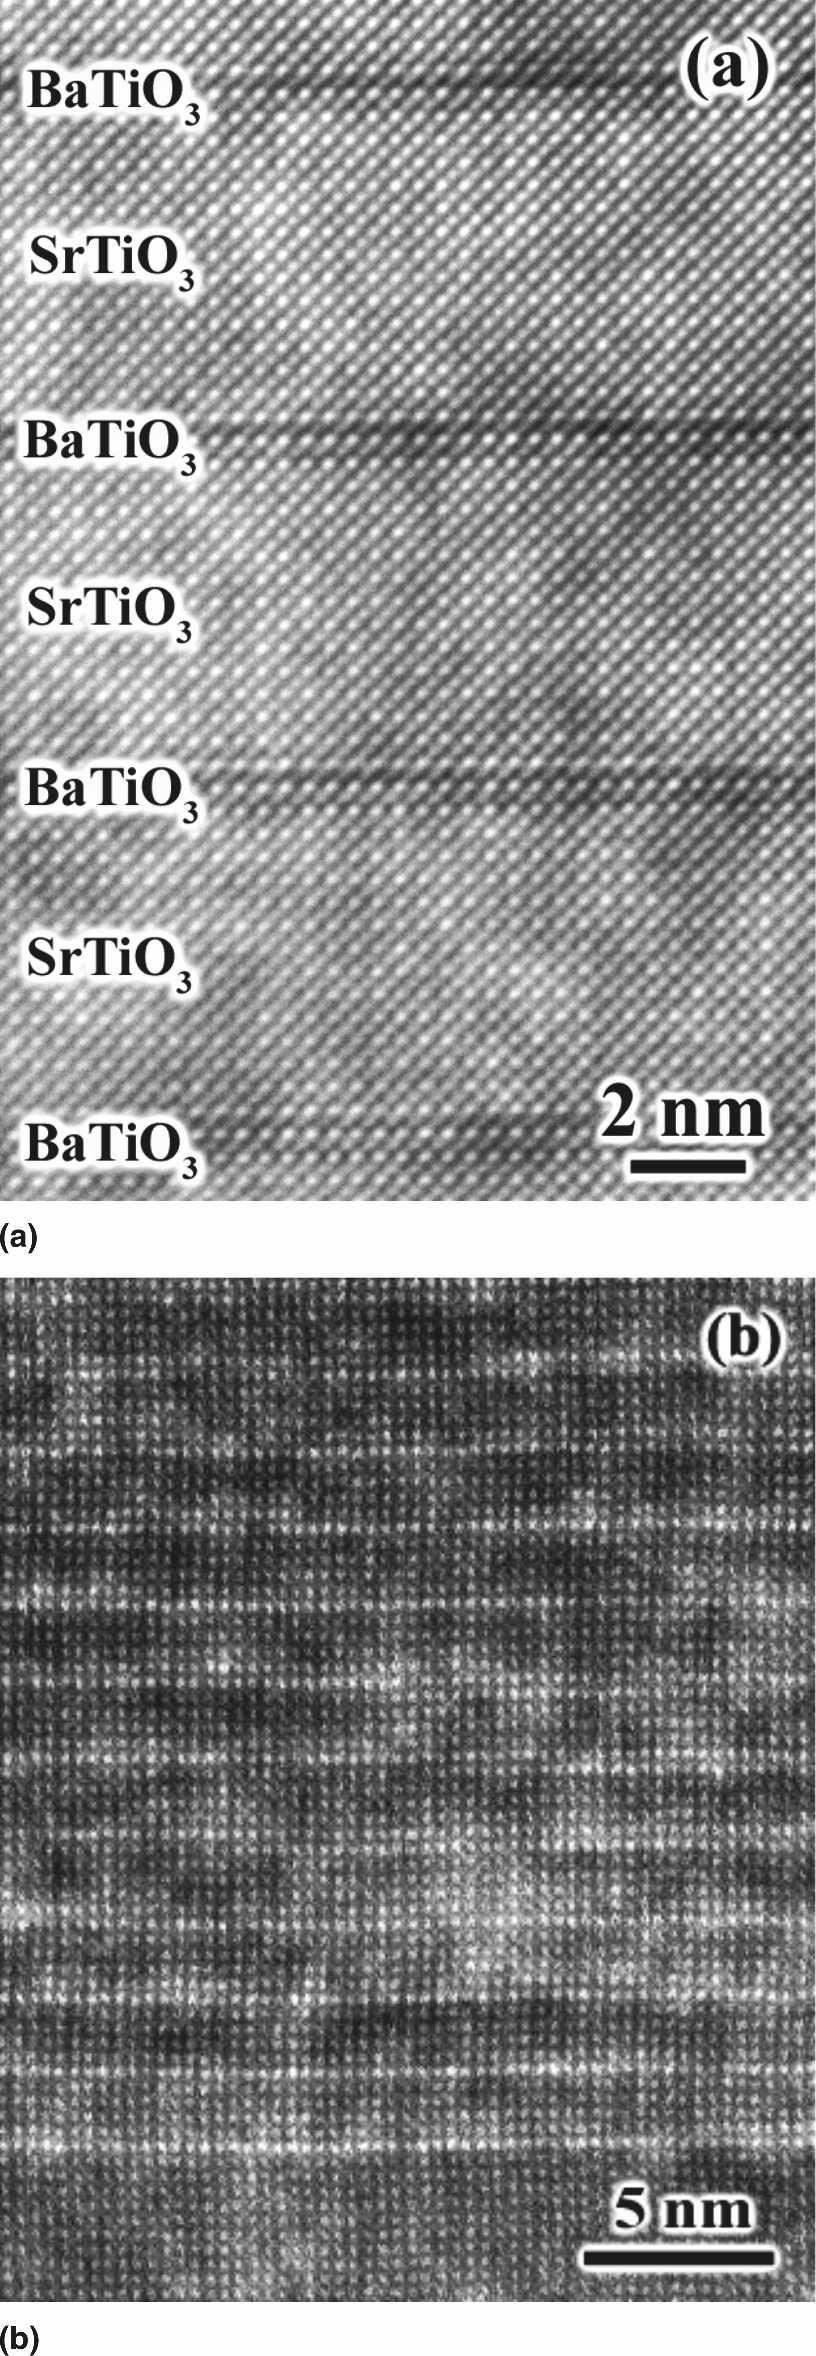 Unlike the partially relaxed [(BaTiO 3 ) 8 /(SrTiO 3 ) 4 ] 40 superlattice, no threading dislocations were observed in the commensurate [(BaTiO 3 ) n /(SrTiO 3 ) m ] p superlattices studied by HRTEM.